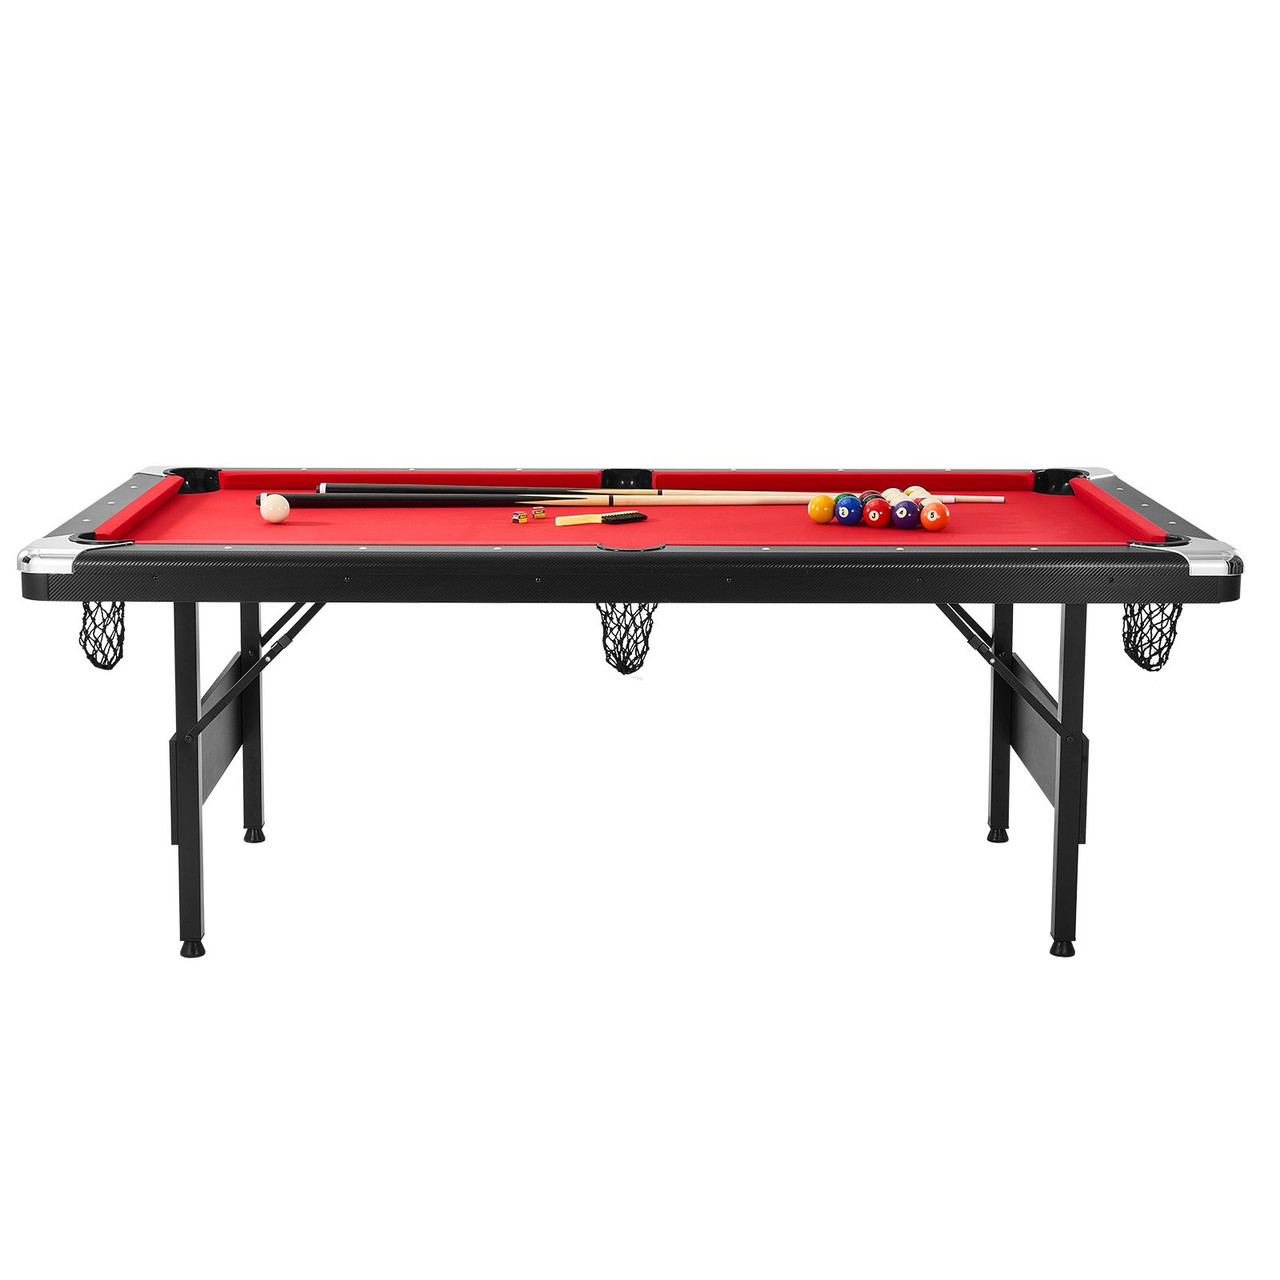 VEVOR Billiards Table, 7 ft Pool Table, Portable Foldable Space-Saving Table, Billiard Table Set Includes Balls, Cues, Chalks and Brush, Black with Red Cloth, Perfect for Family Game Room Kids Adults